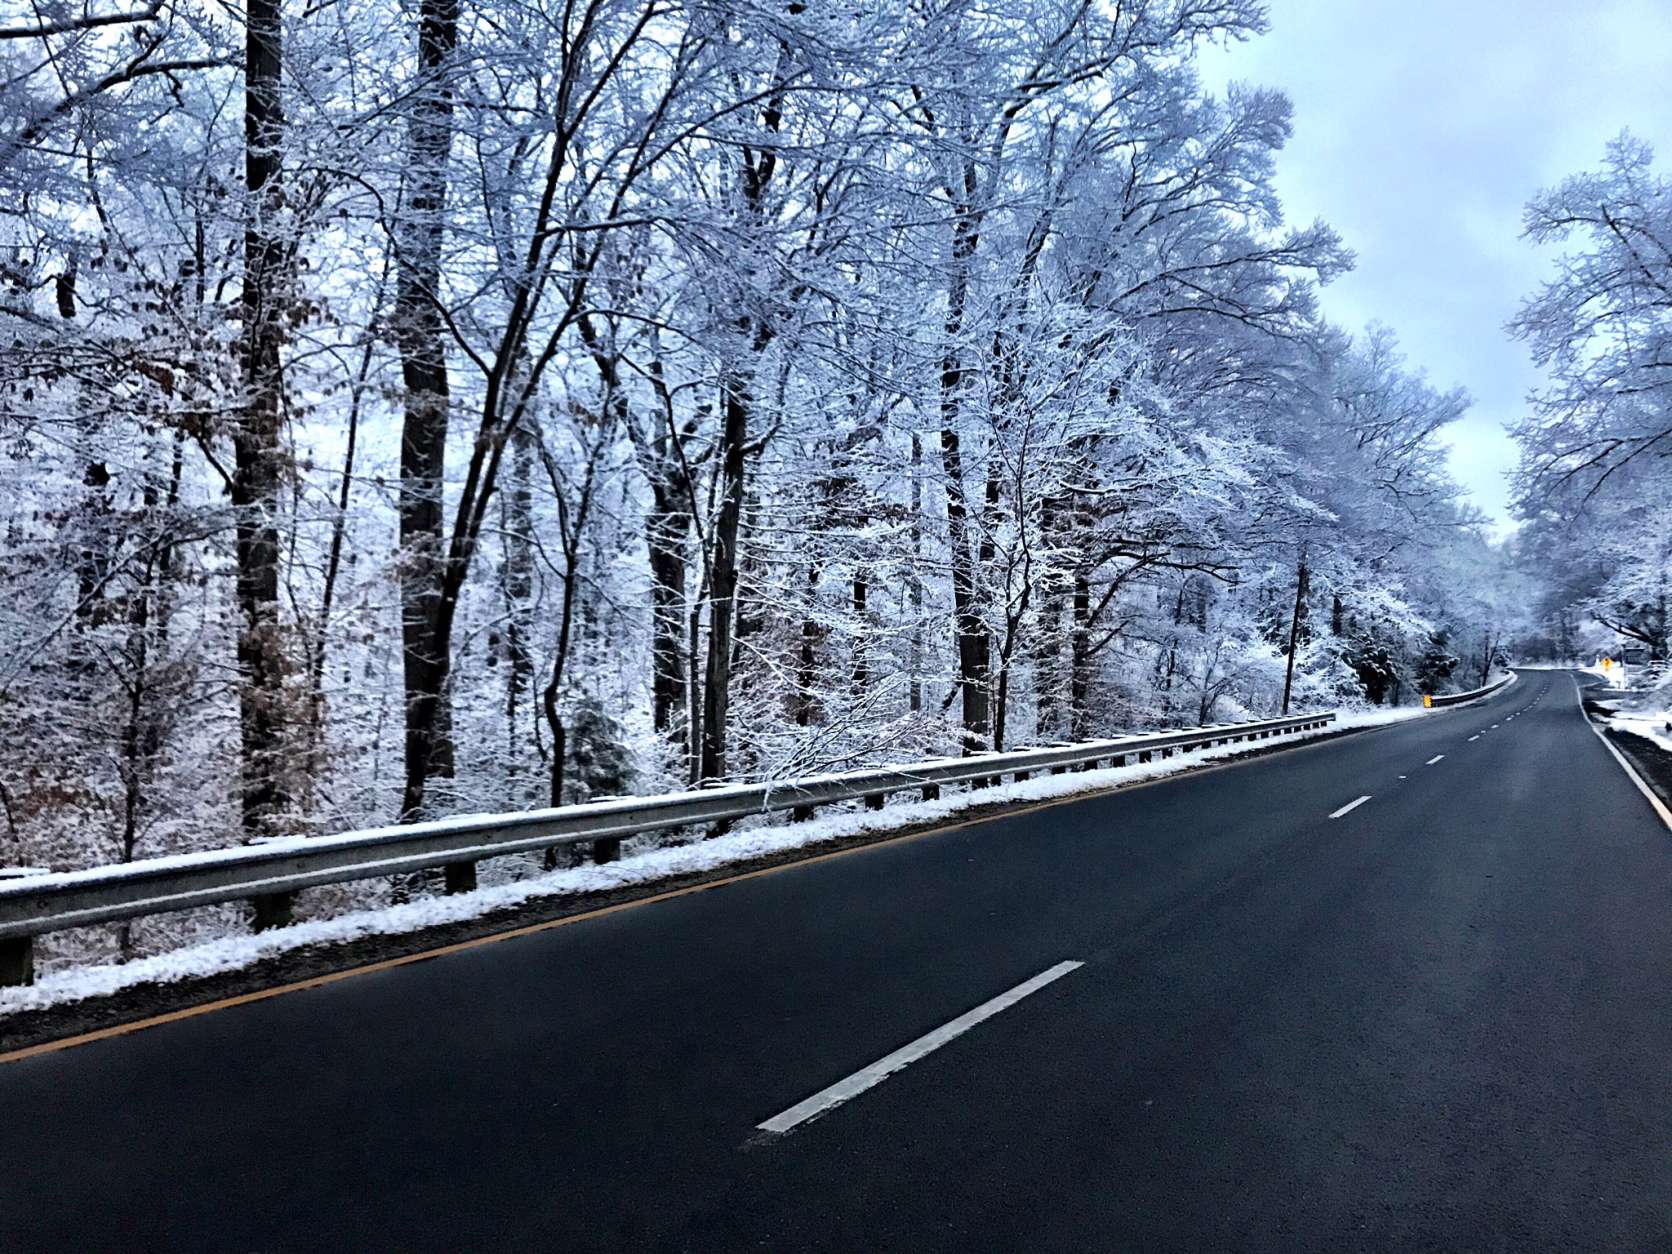 Even though Stafford County got 2 to 3 inches of snow, in most places road surfaces are just wet. (WTOP/Neal Augenstein)